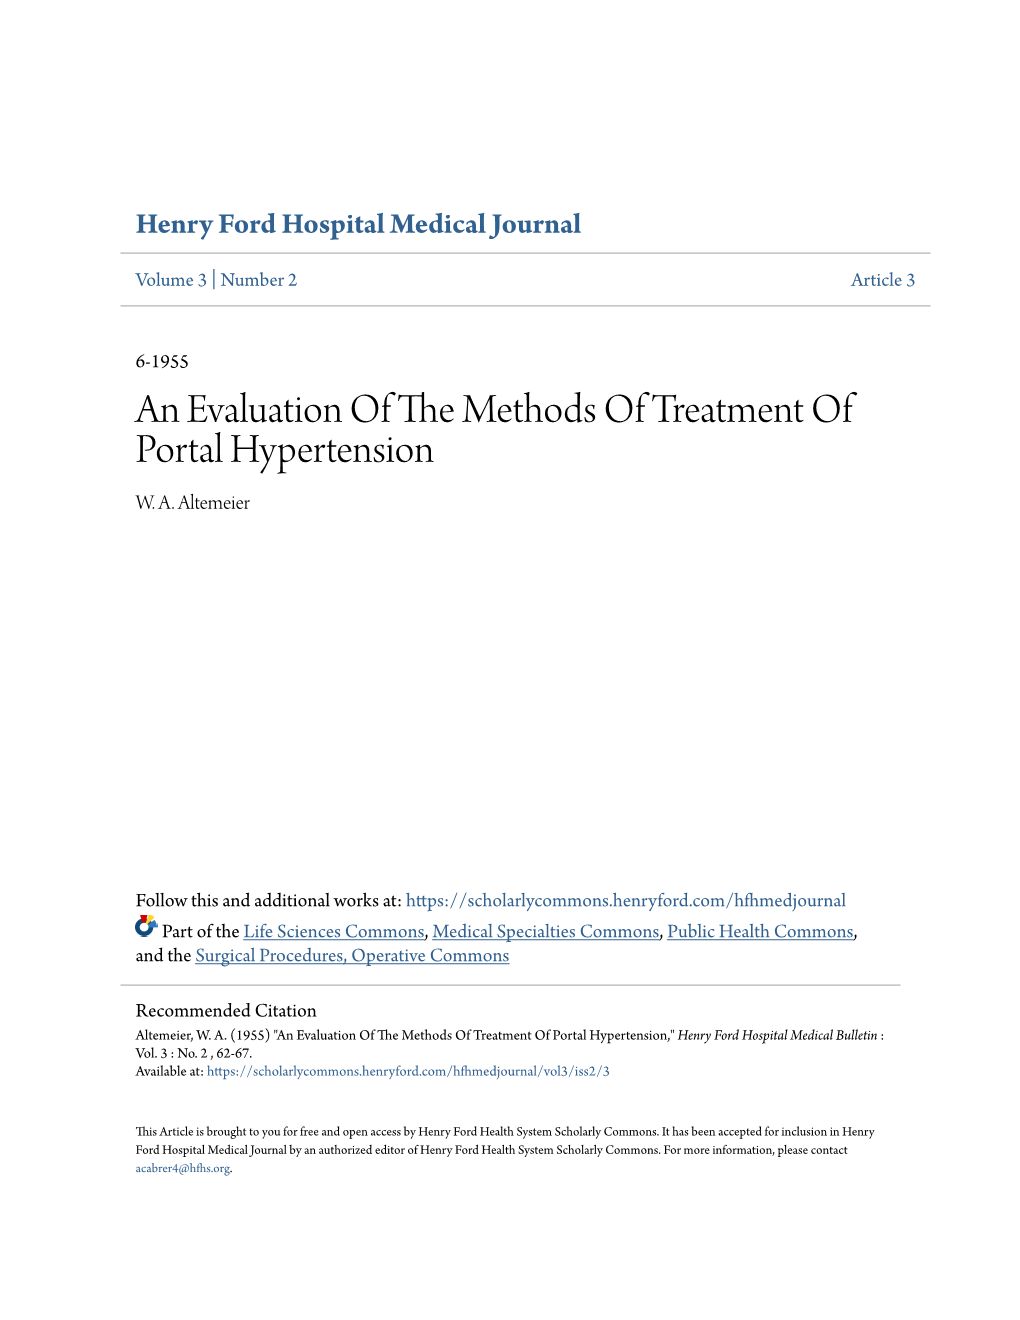 An Evaluation of the Methods of Treatment of Portal Hypertension